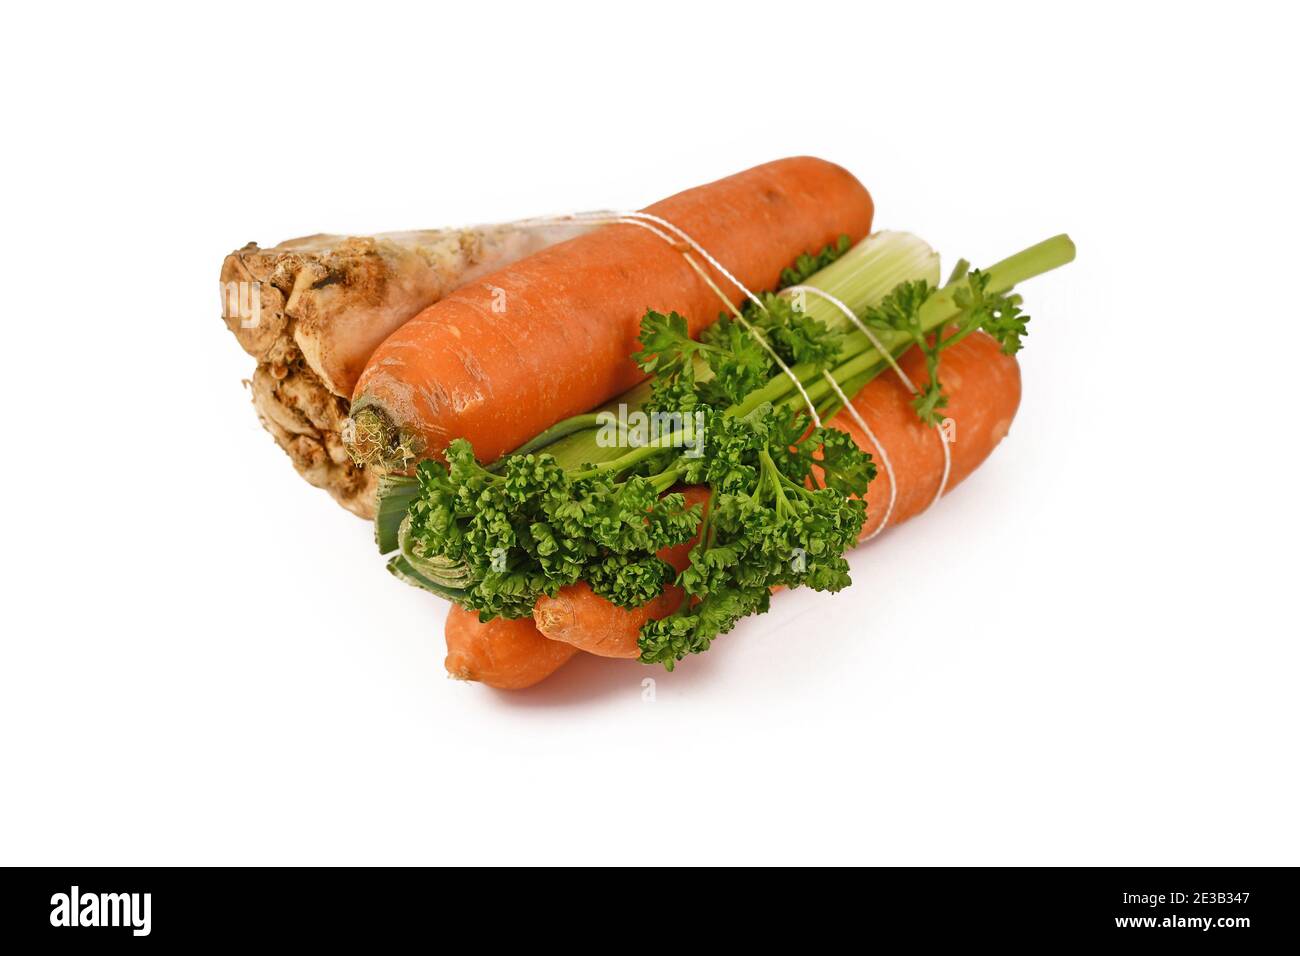 Bundle of soup vegetables containing carrots, leeks, parsley and celery root isolated on white background. Traditionally sold at German supermarkets Stock Photo